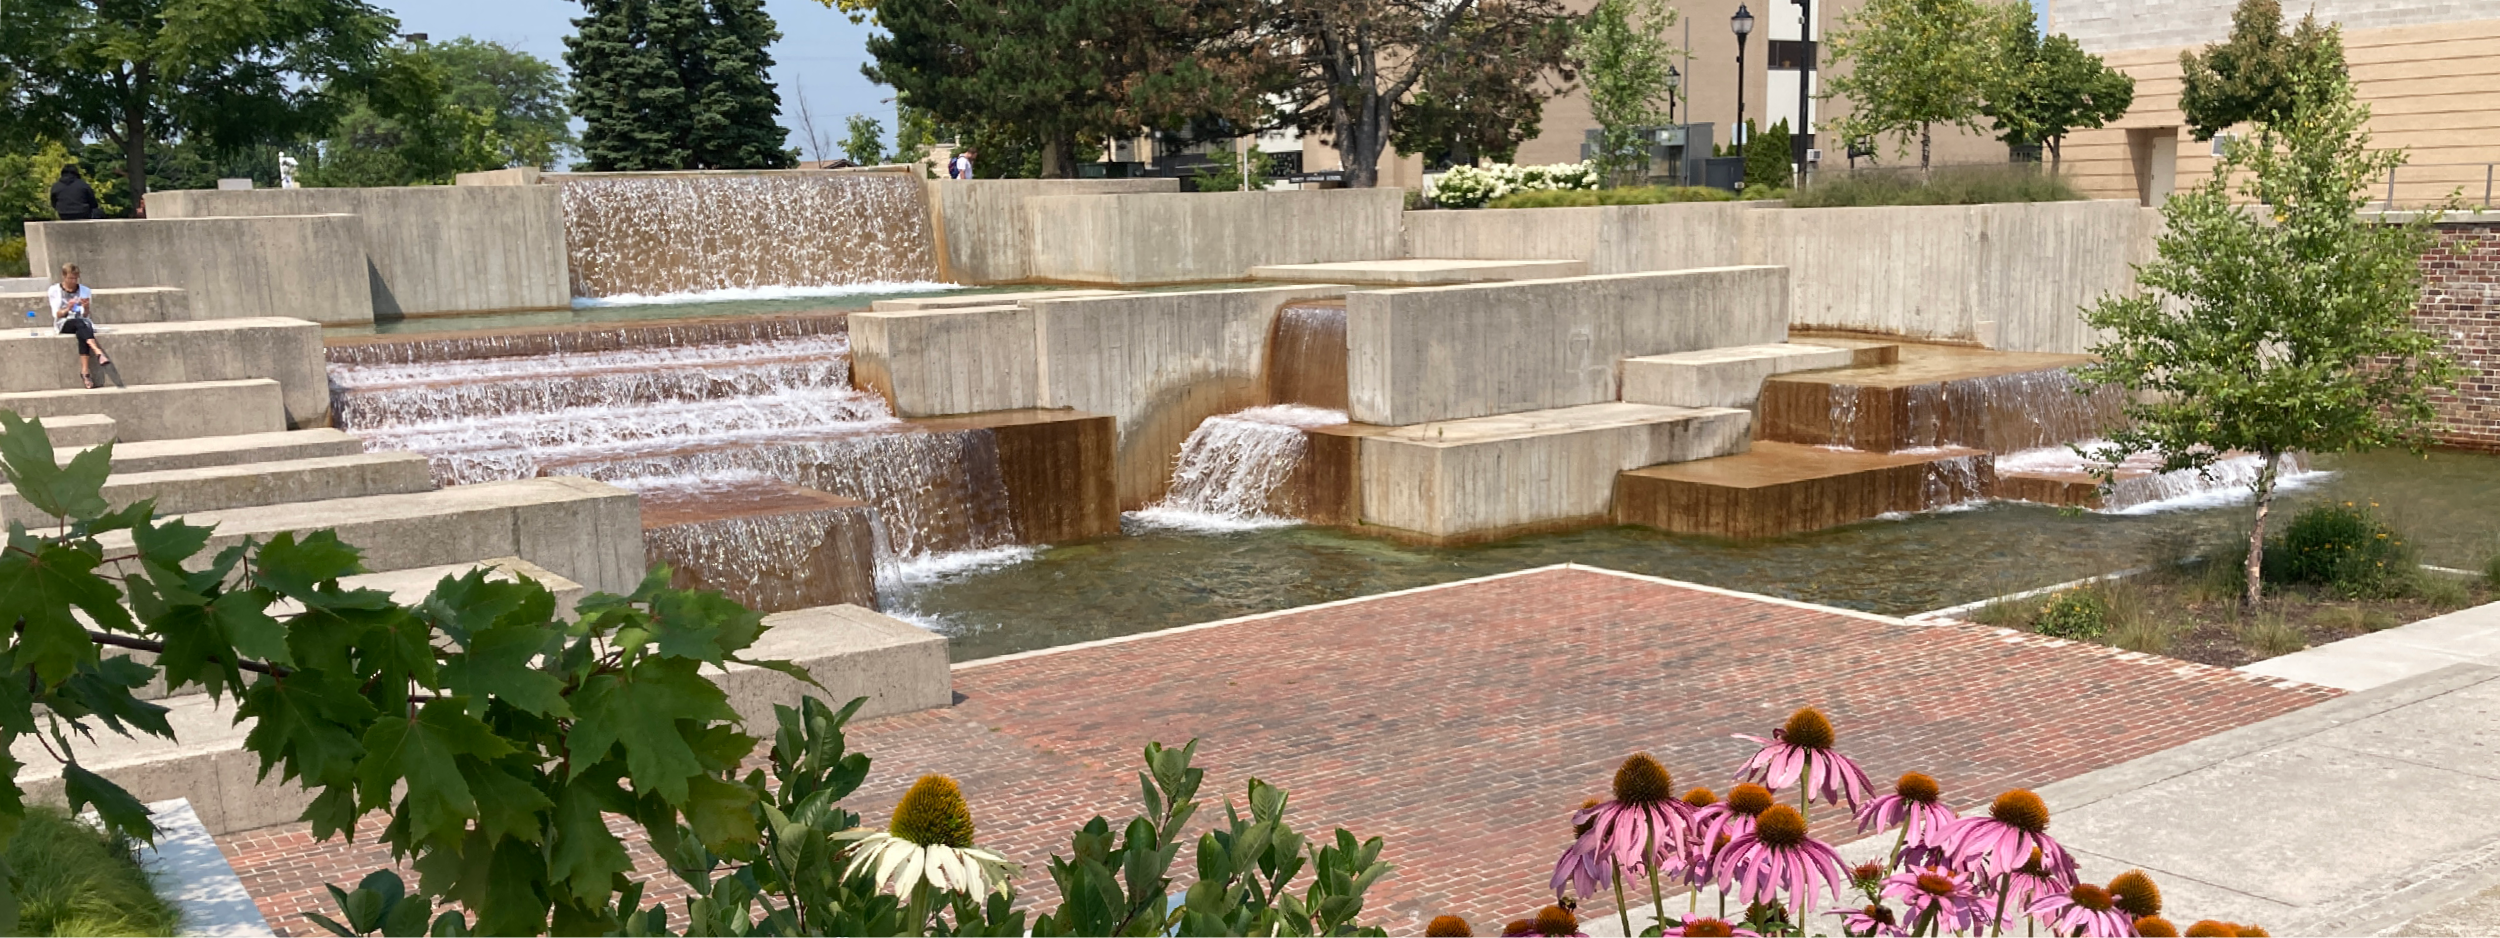 A photo of the Lawrence Halprin designed fountain at Mead Public Library.